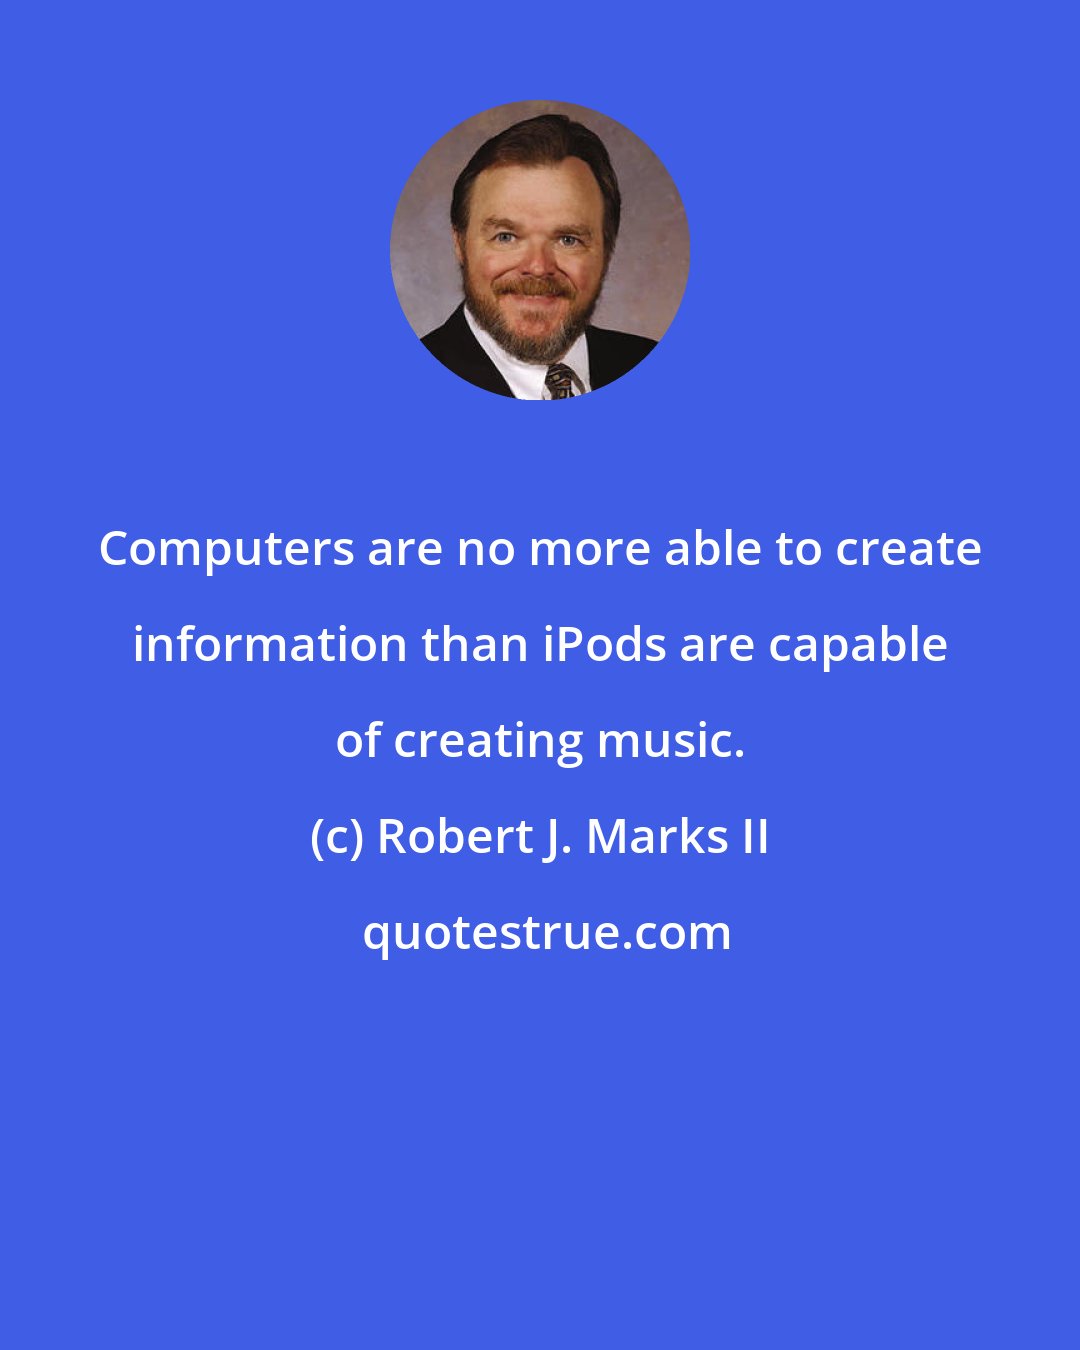 Robert J. Marks II: Computers are no more able to create information than iPods are capable of creating music.